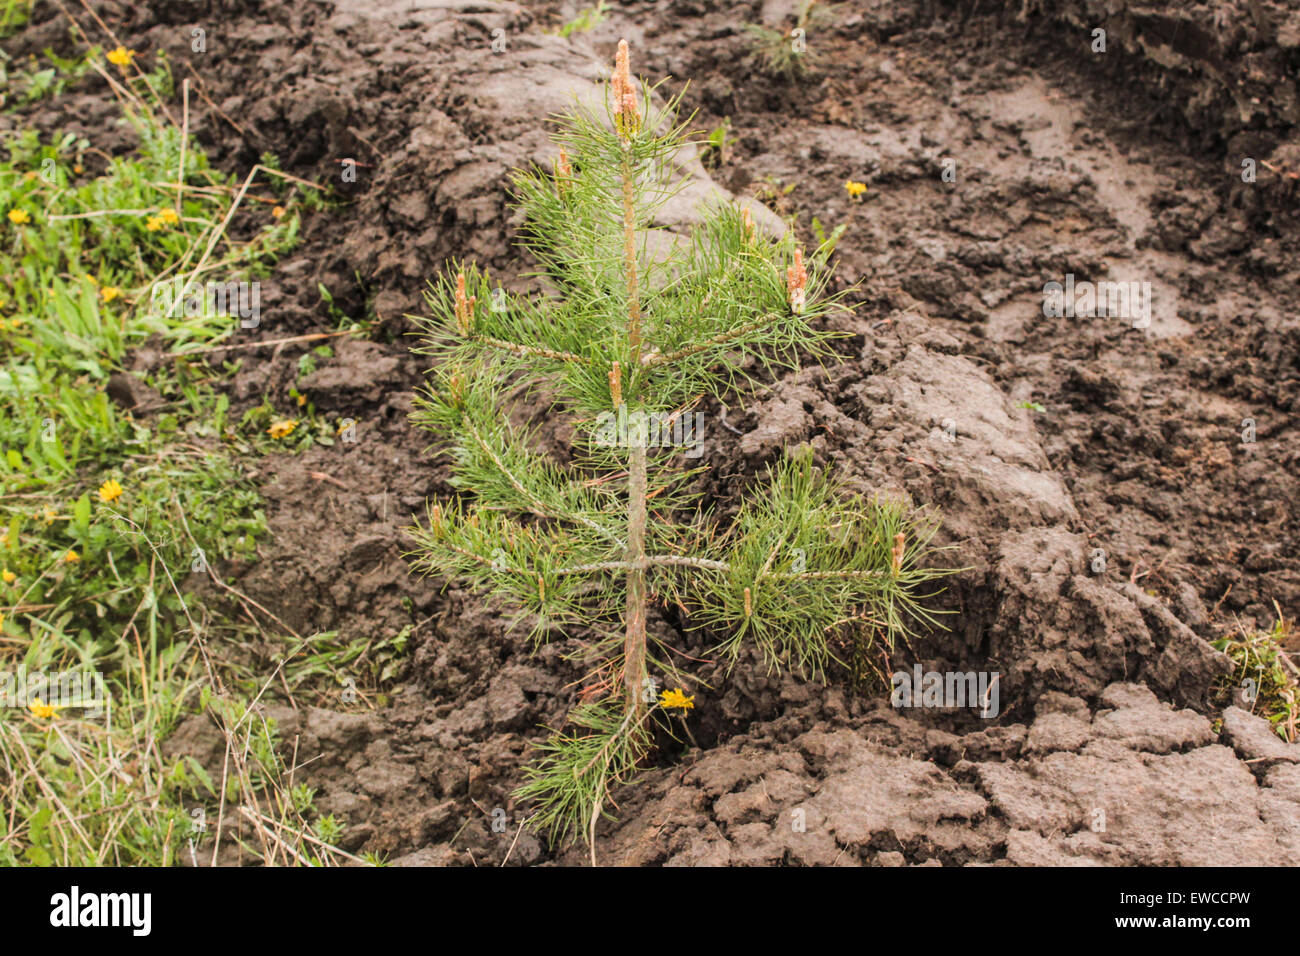 Newly planted one year old pine tree seedling growing in forest floor. Stock Photo